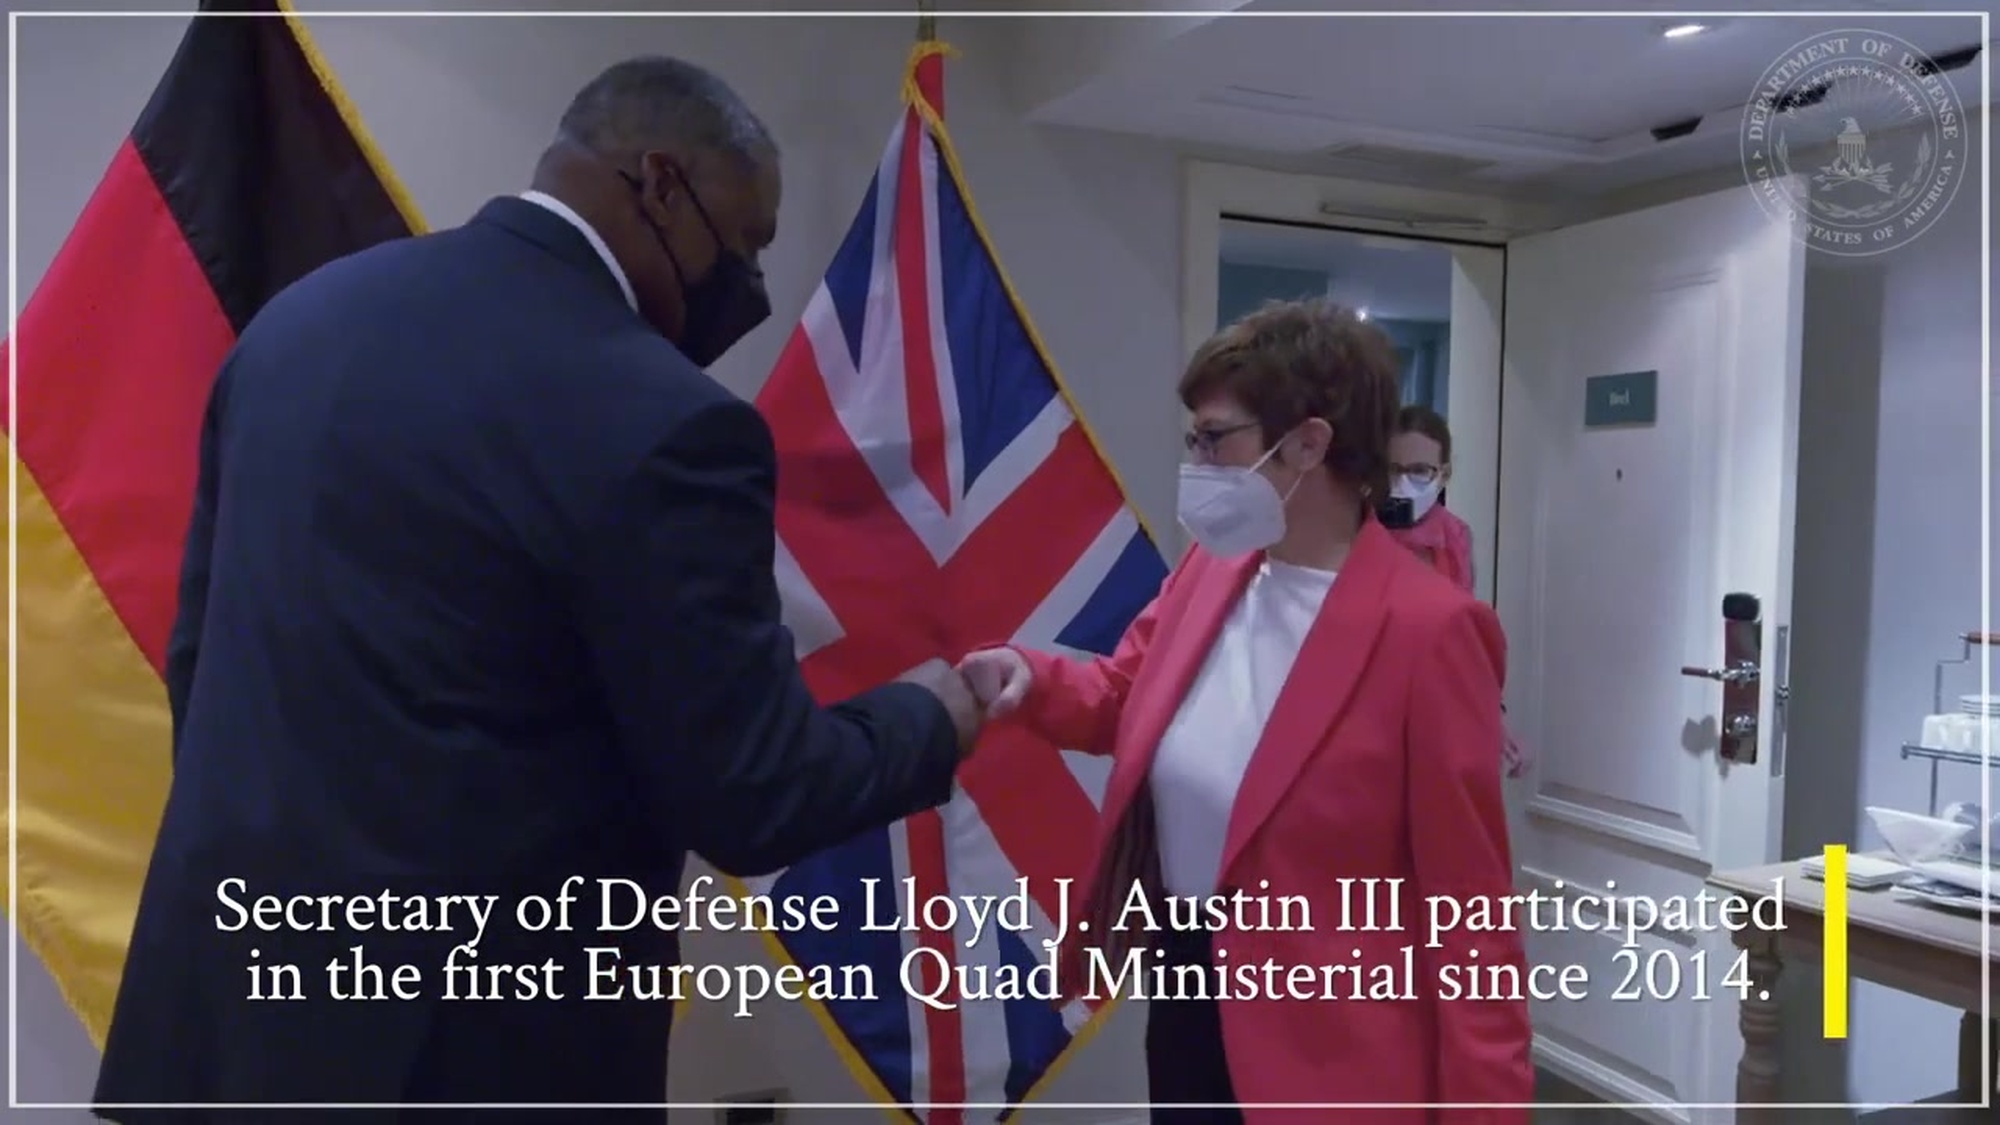 Secretary of Defense Lloyd J. Austin III shakes hands with another official. 